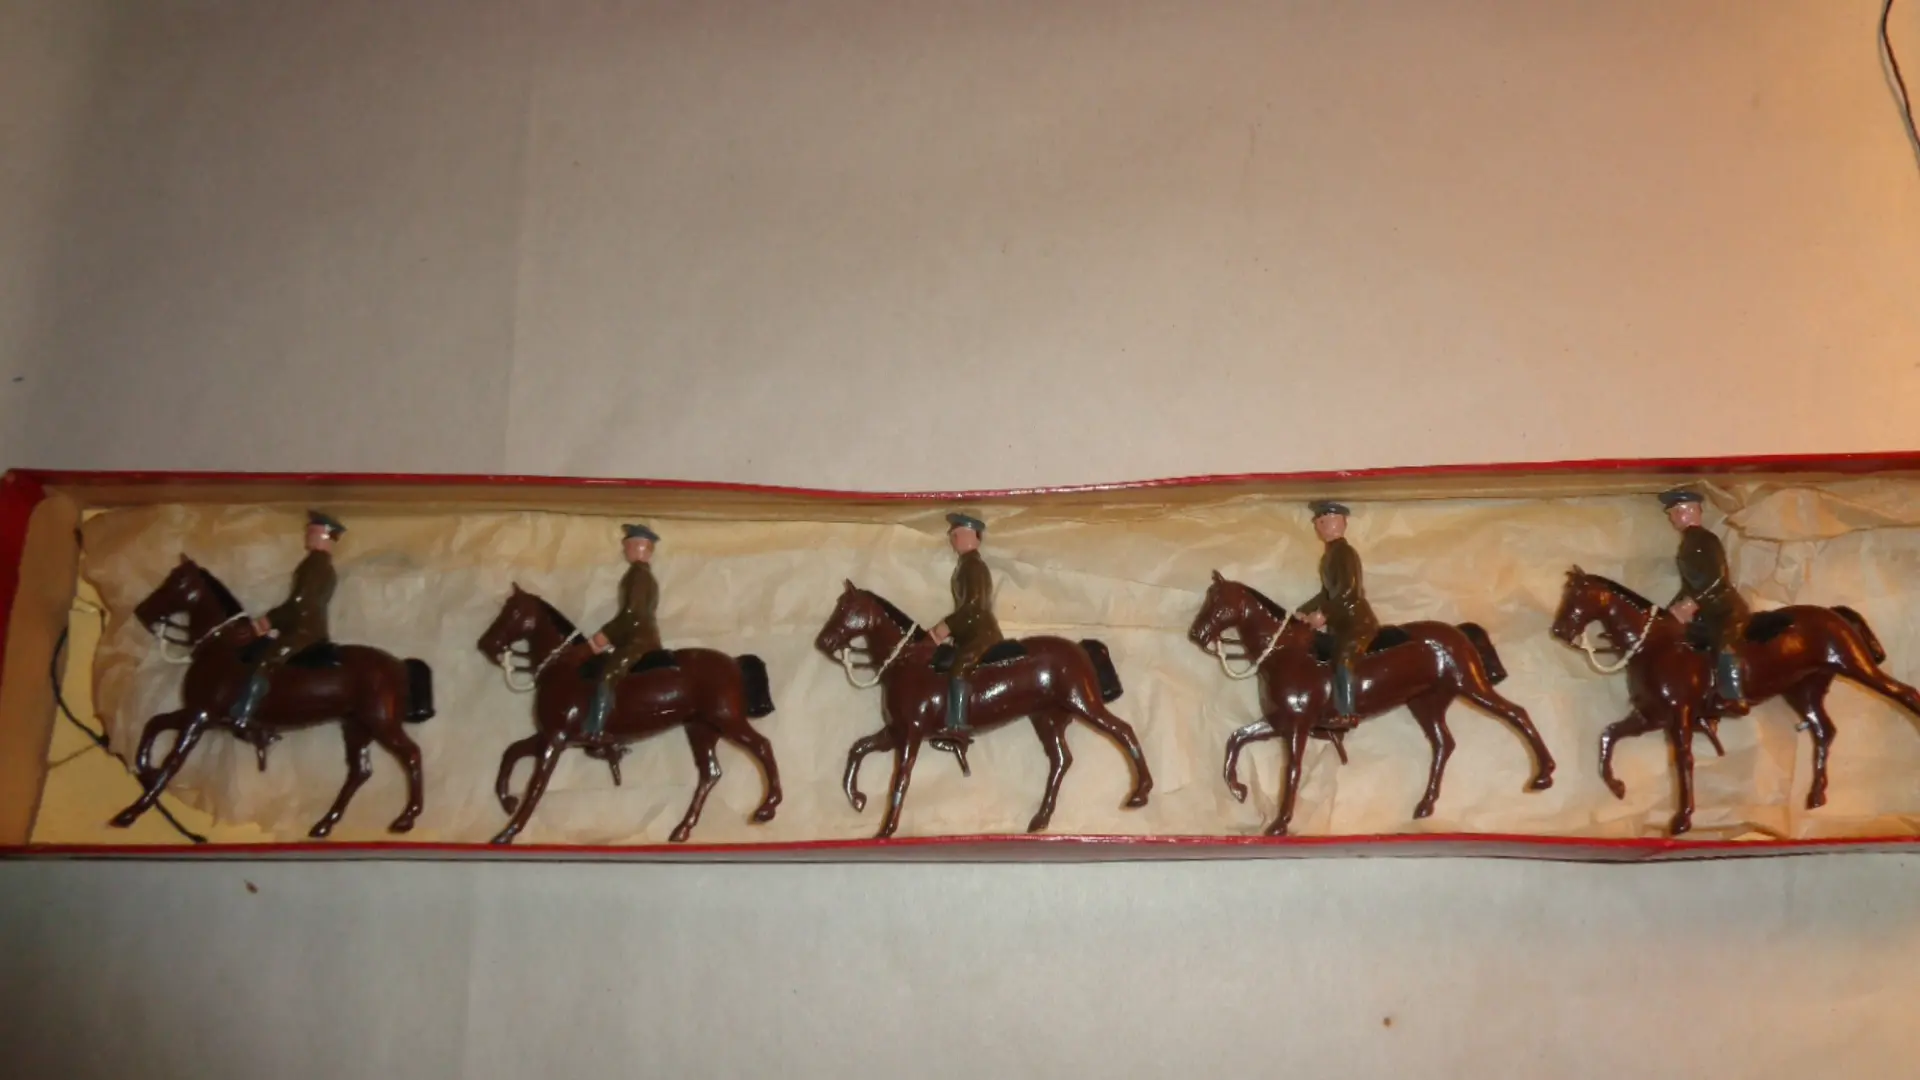 Toy soldiers on horses